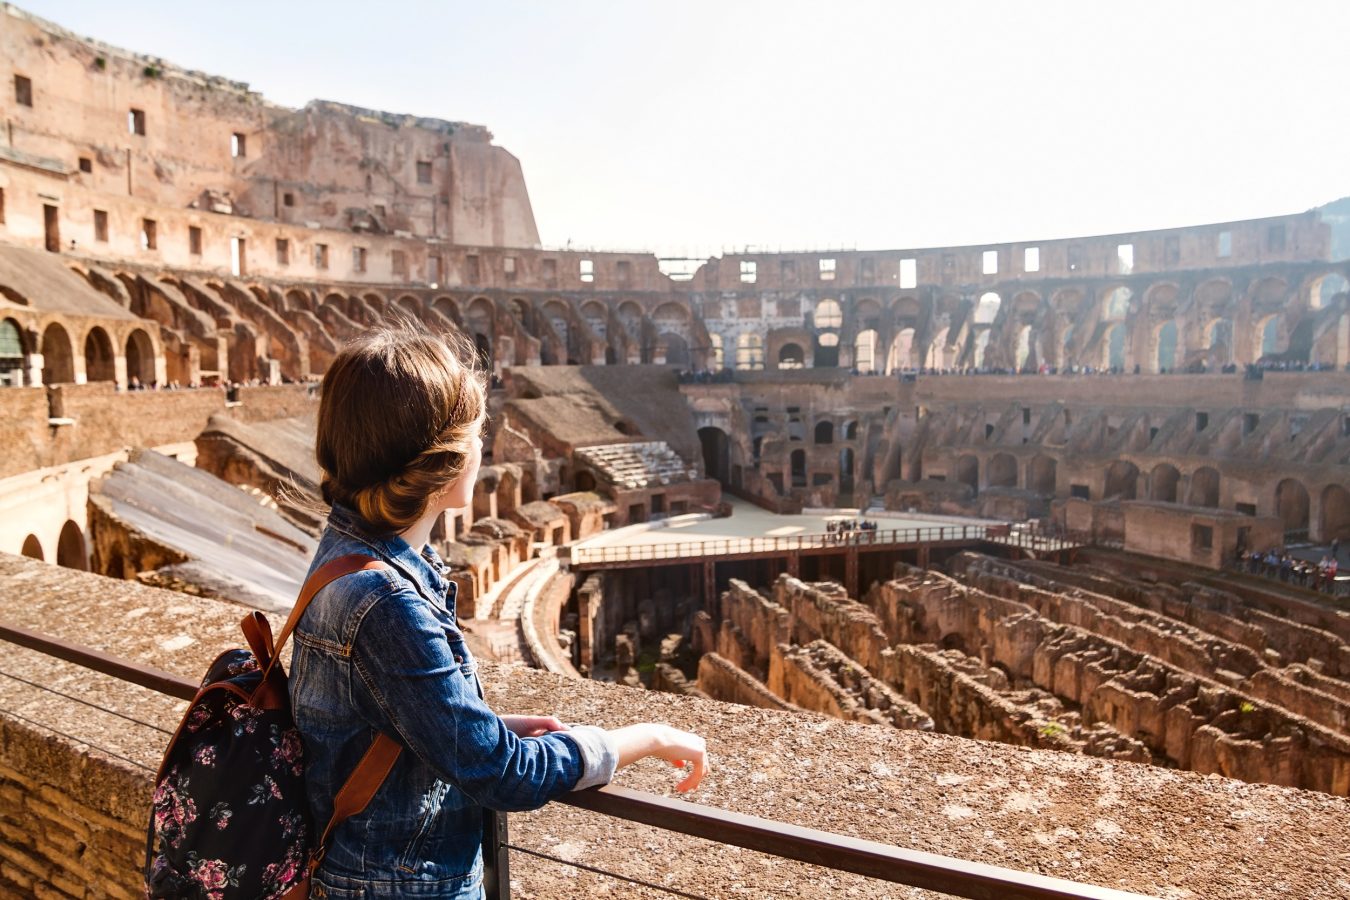 Girl with backpack exploring inside the Colosseum (Coliseum). Rome, Italy